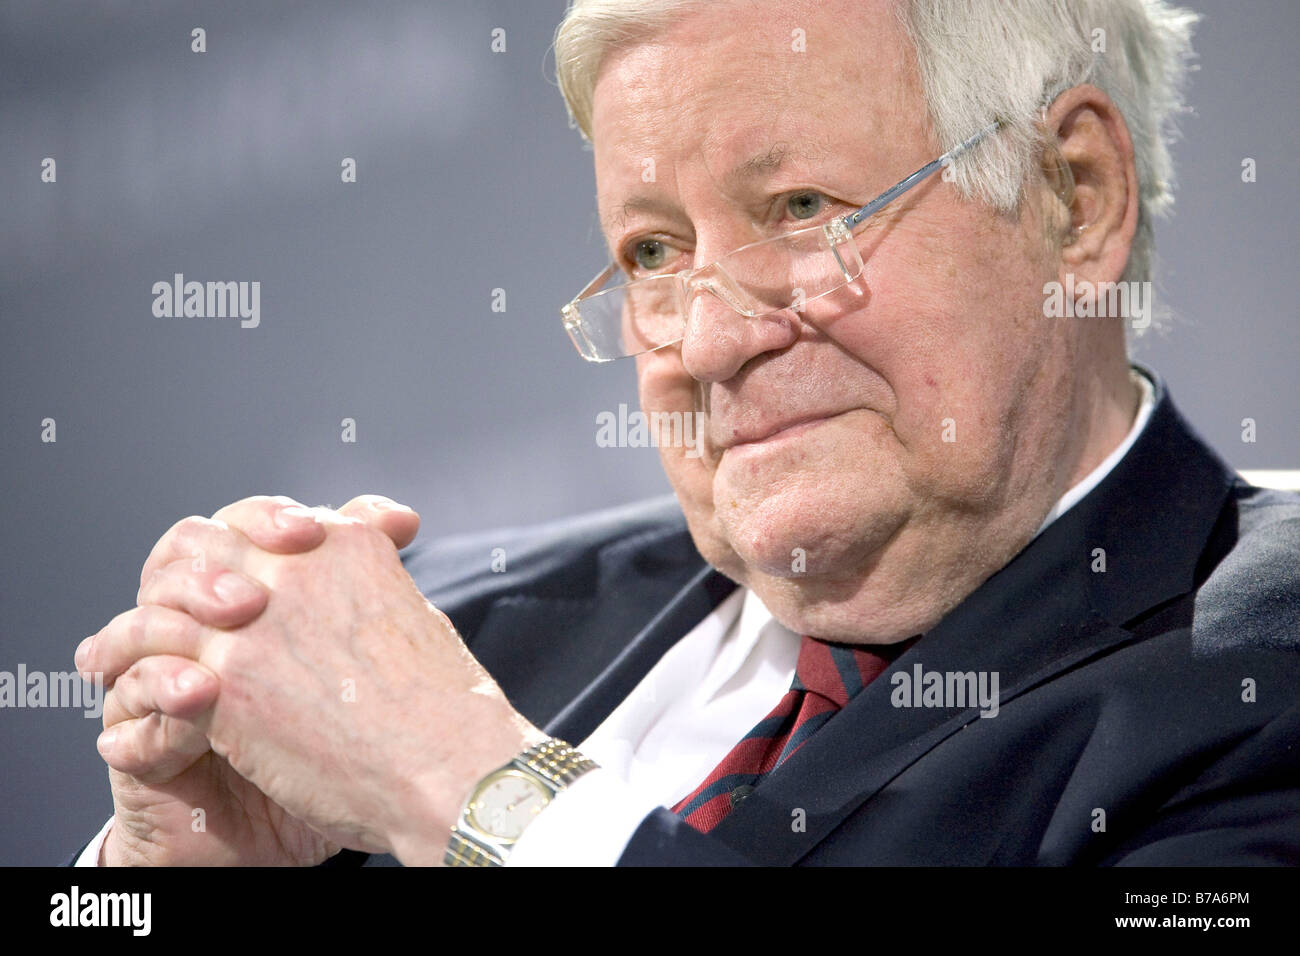 Former chancellor Helmut Schmidt, SPD, Social Democratic Party of Germany, in Passau, Germany, Europe Stock Photo